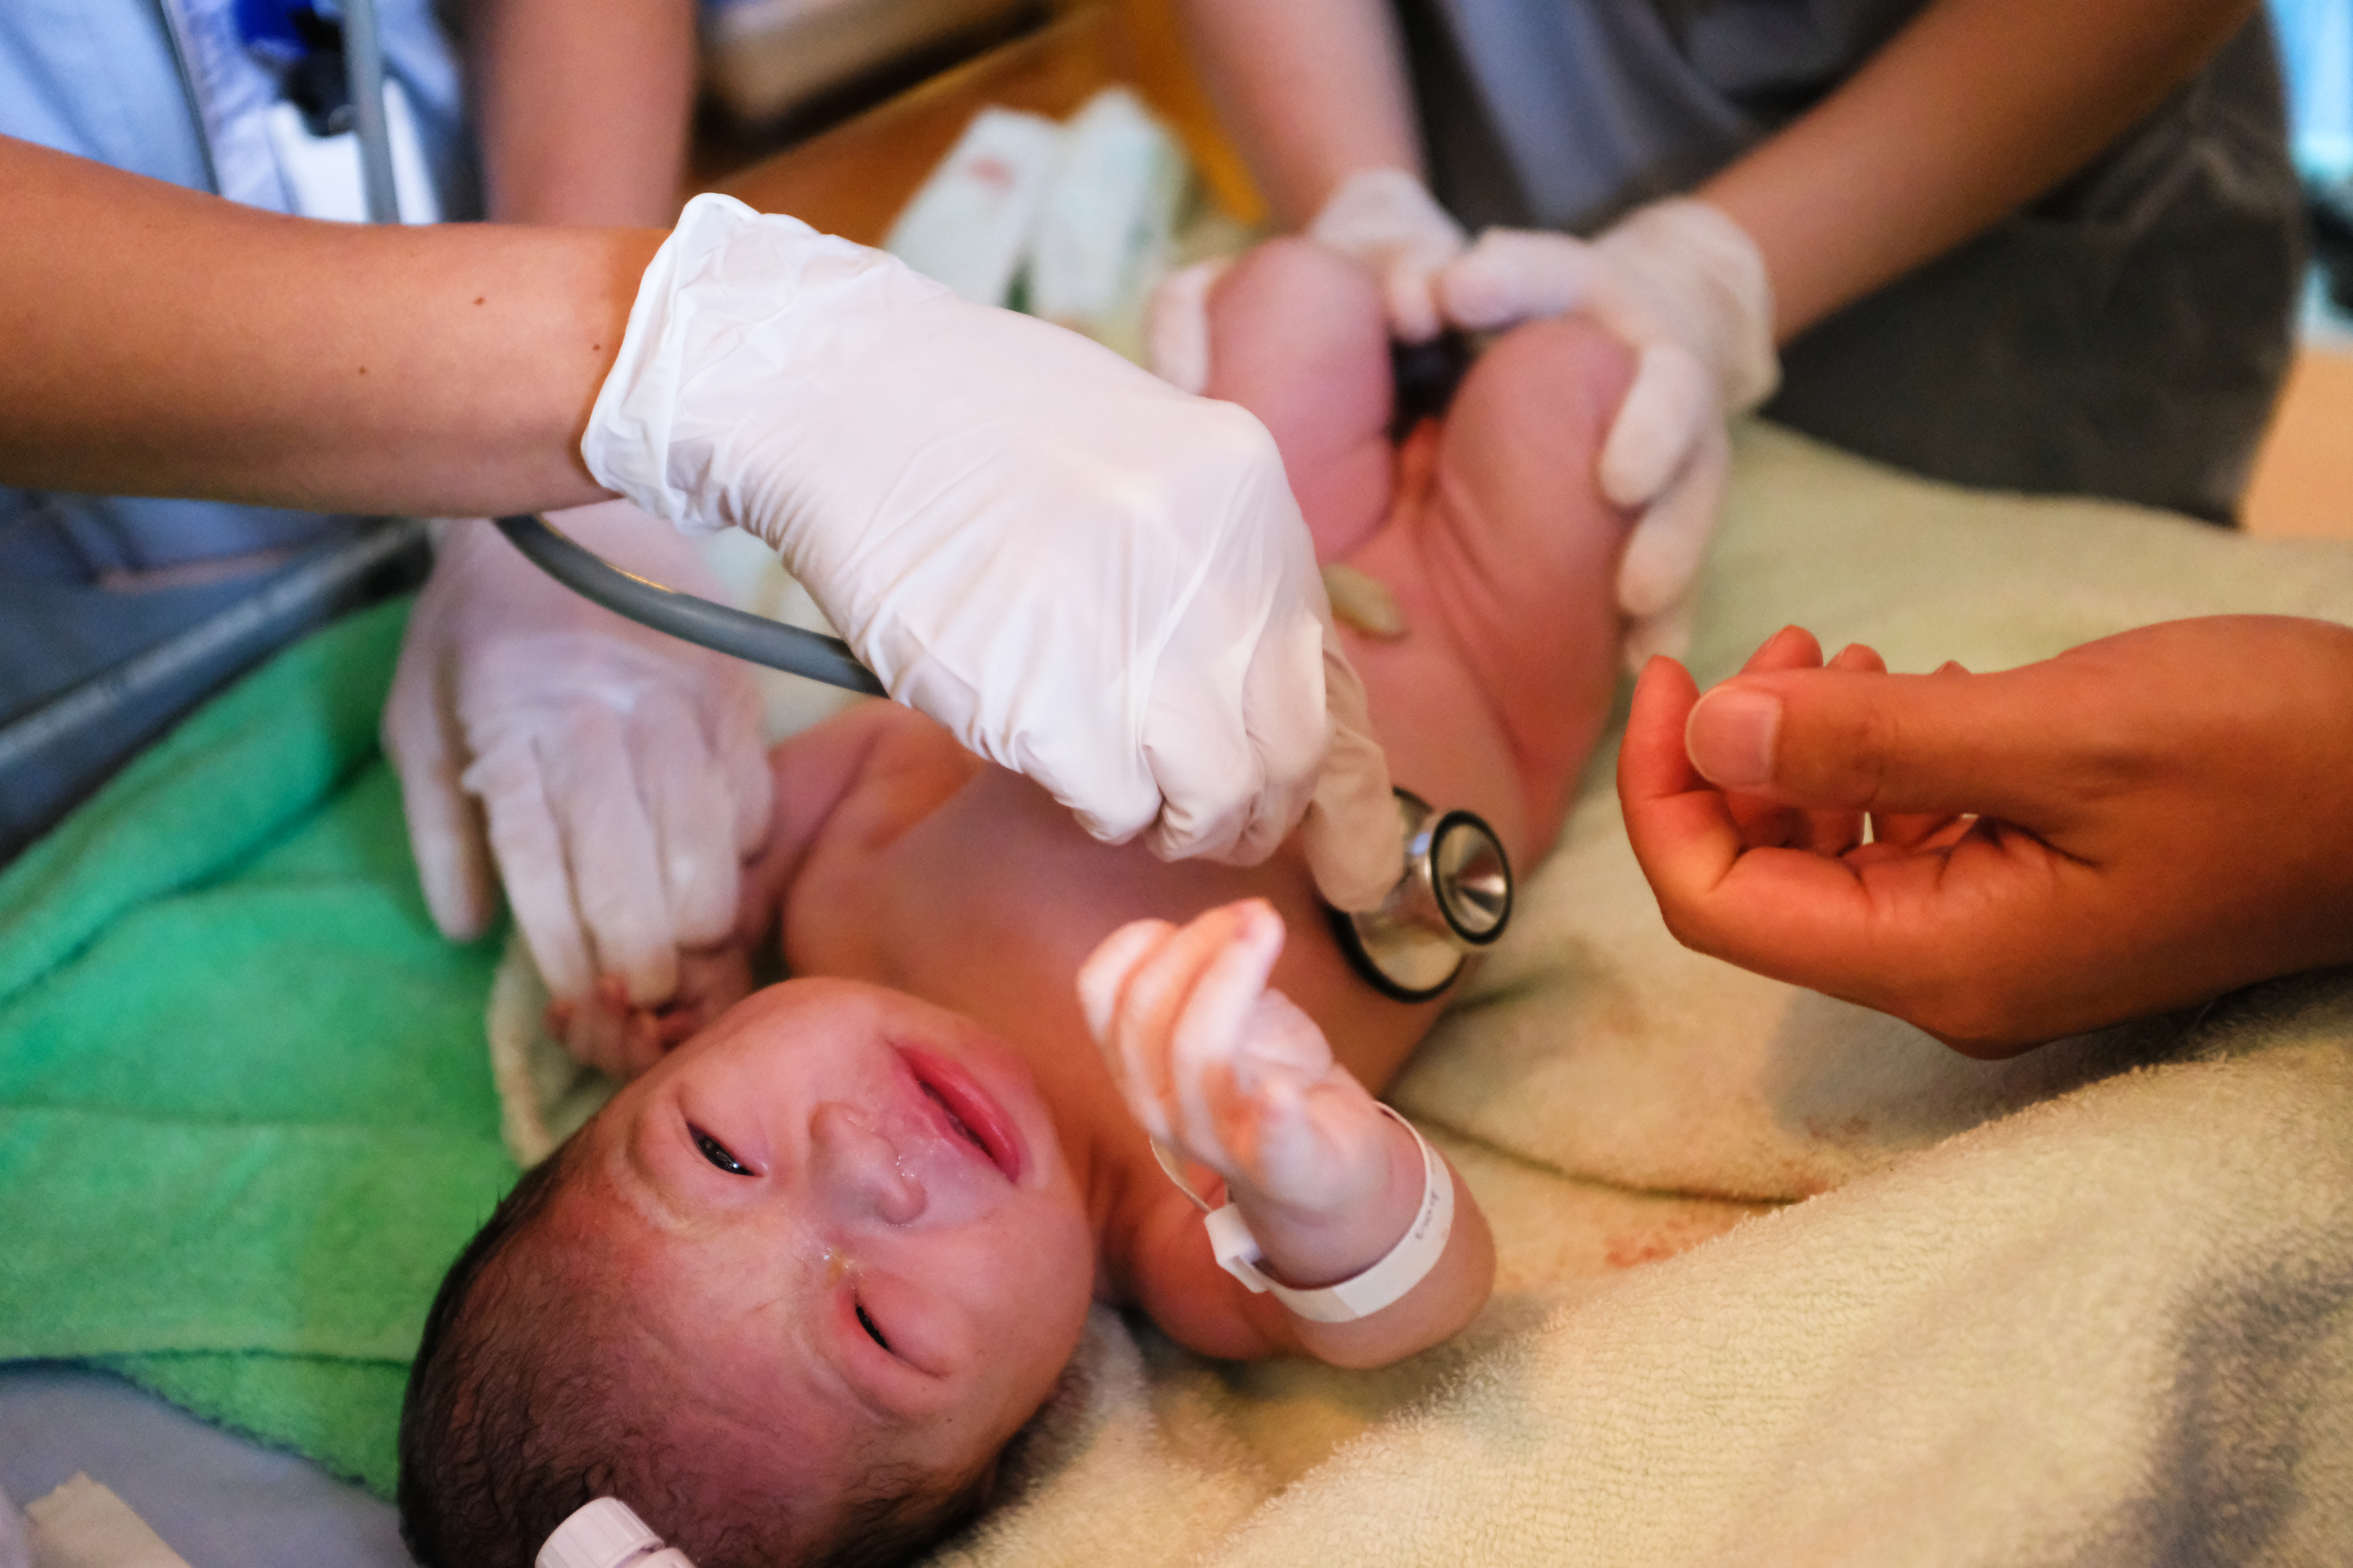 A baby's first exam on a warming table. Two sets of gloved hands--one holding baby's legs and one holding a stethoscope. 